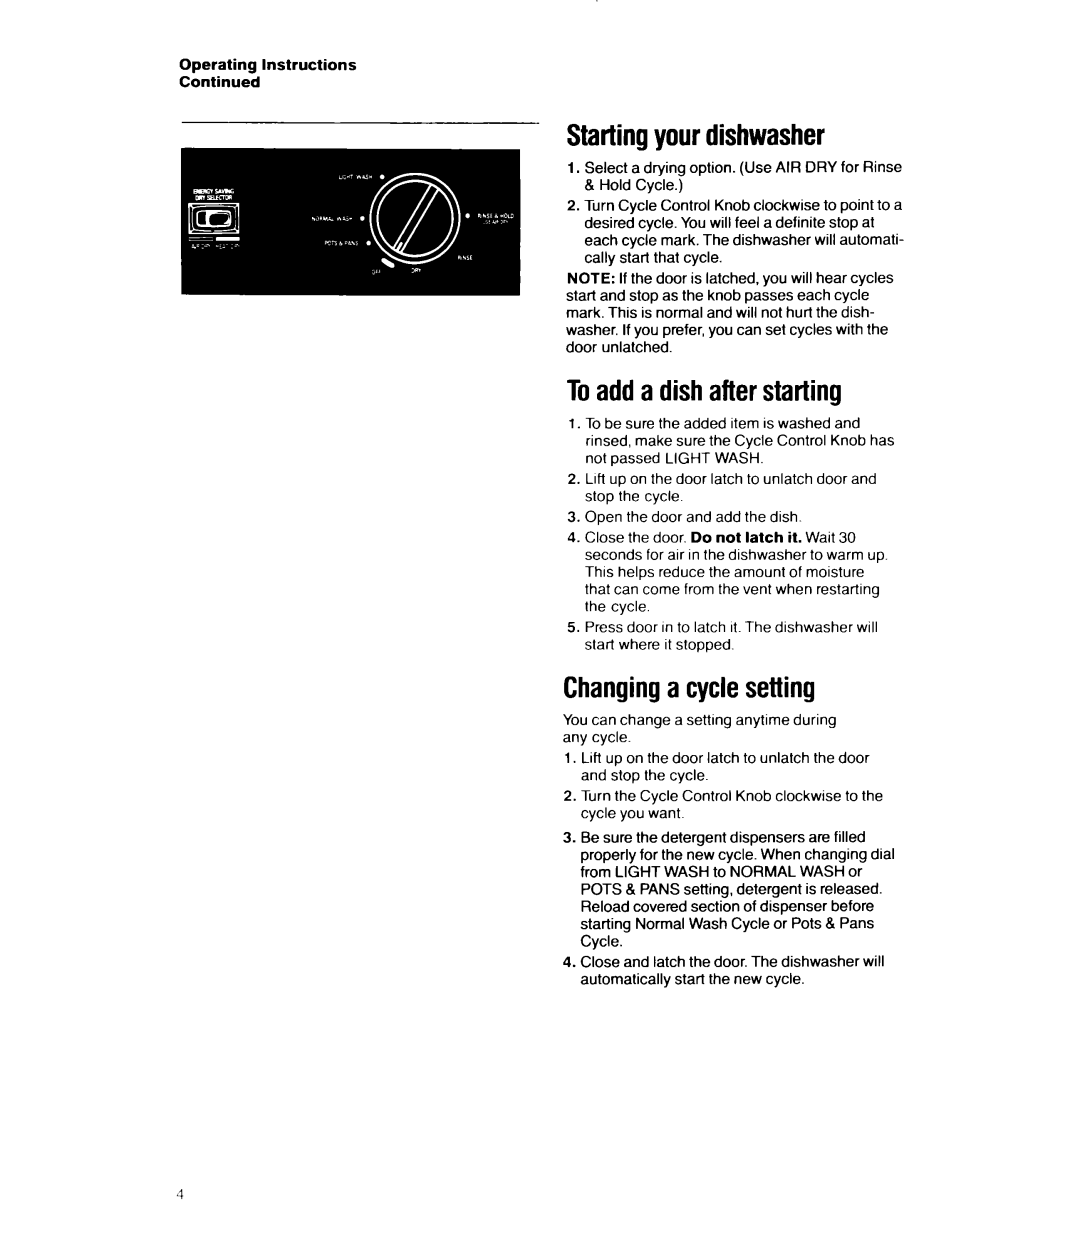 Whirlpool DU5200XW manual Startingyour dishwasher, Toadd a dish after starting, Changinga cyclesetting 